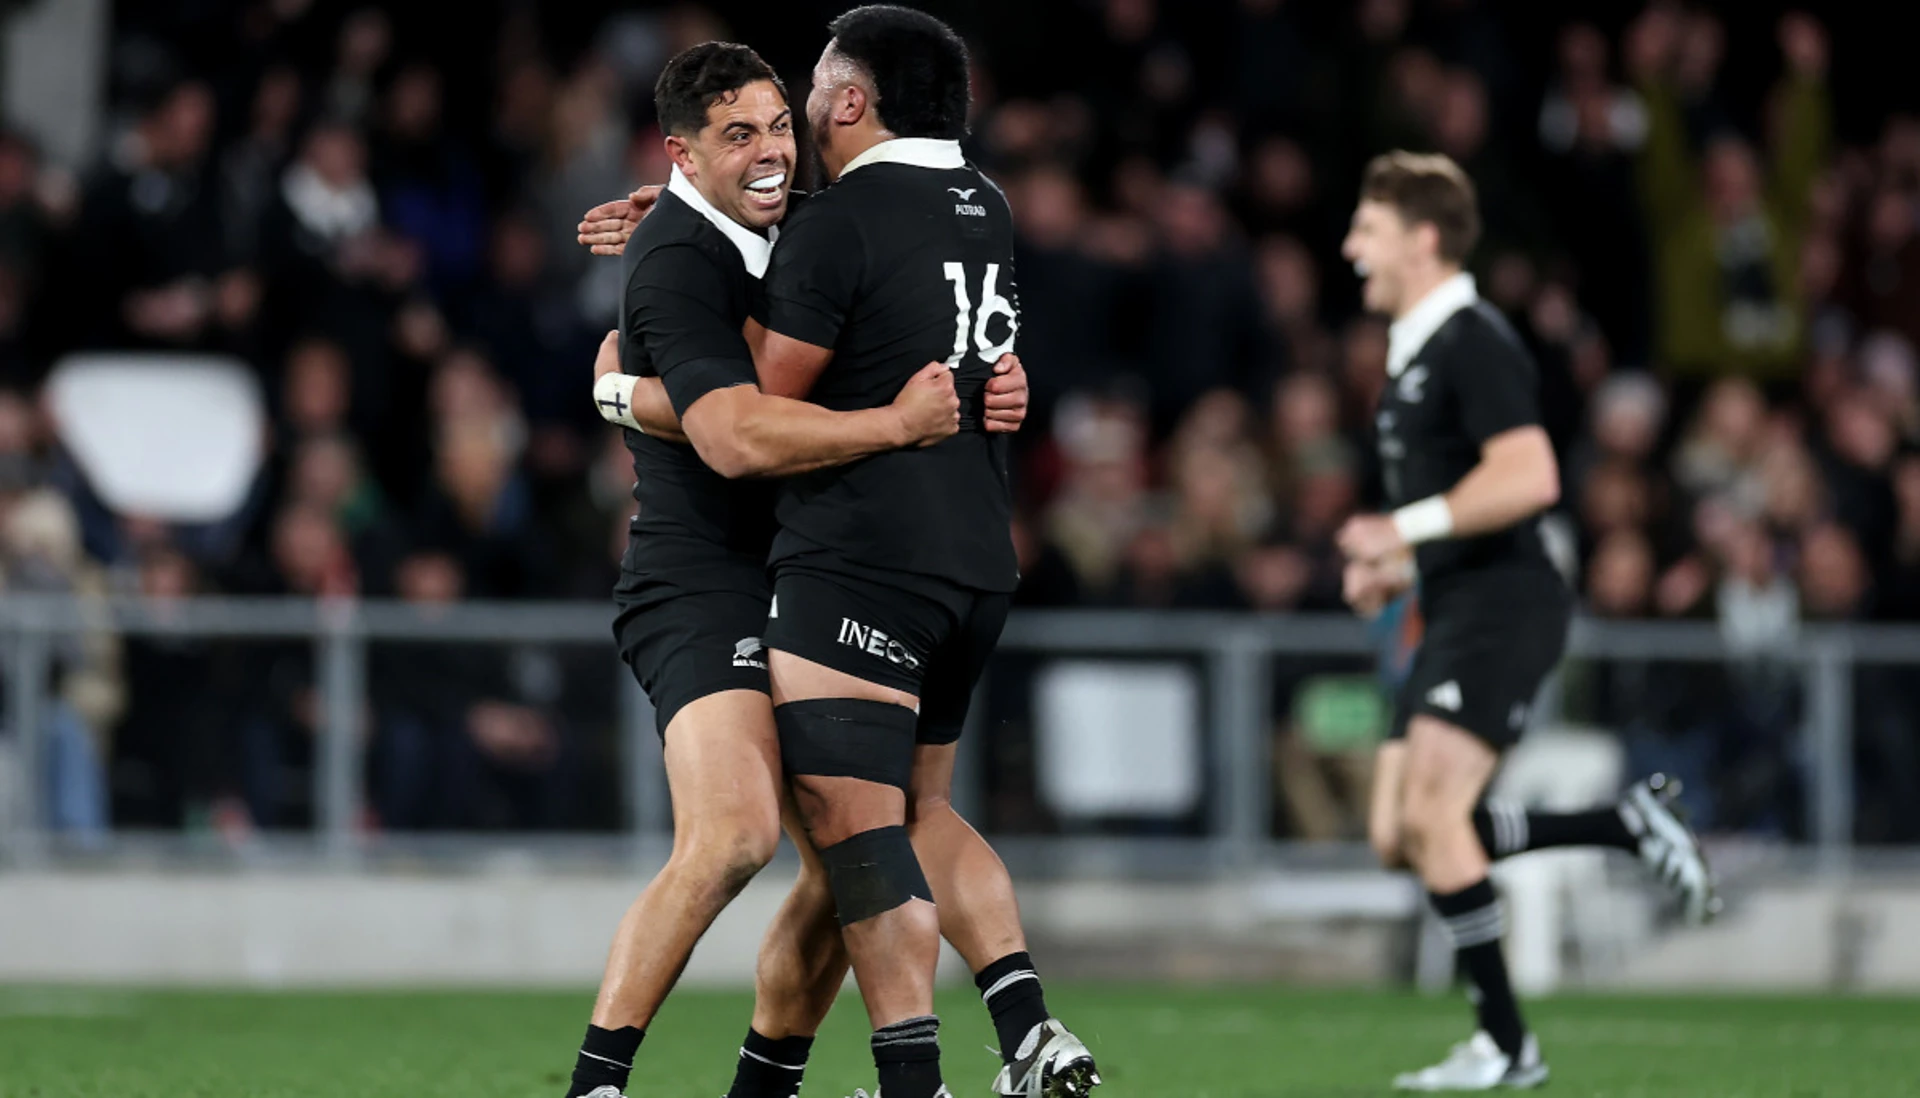 New Zealand edge England 16-15 in tense first test